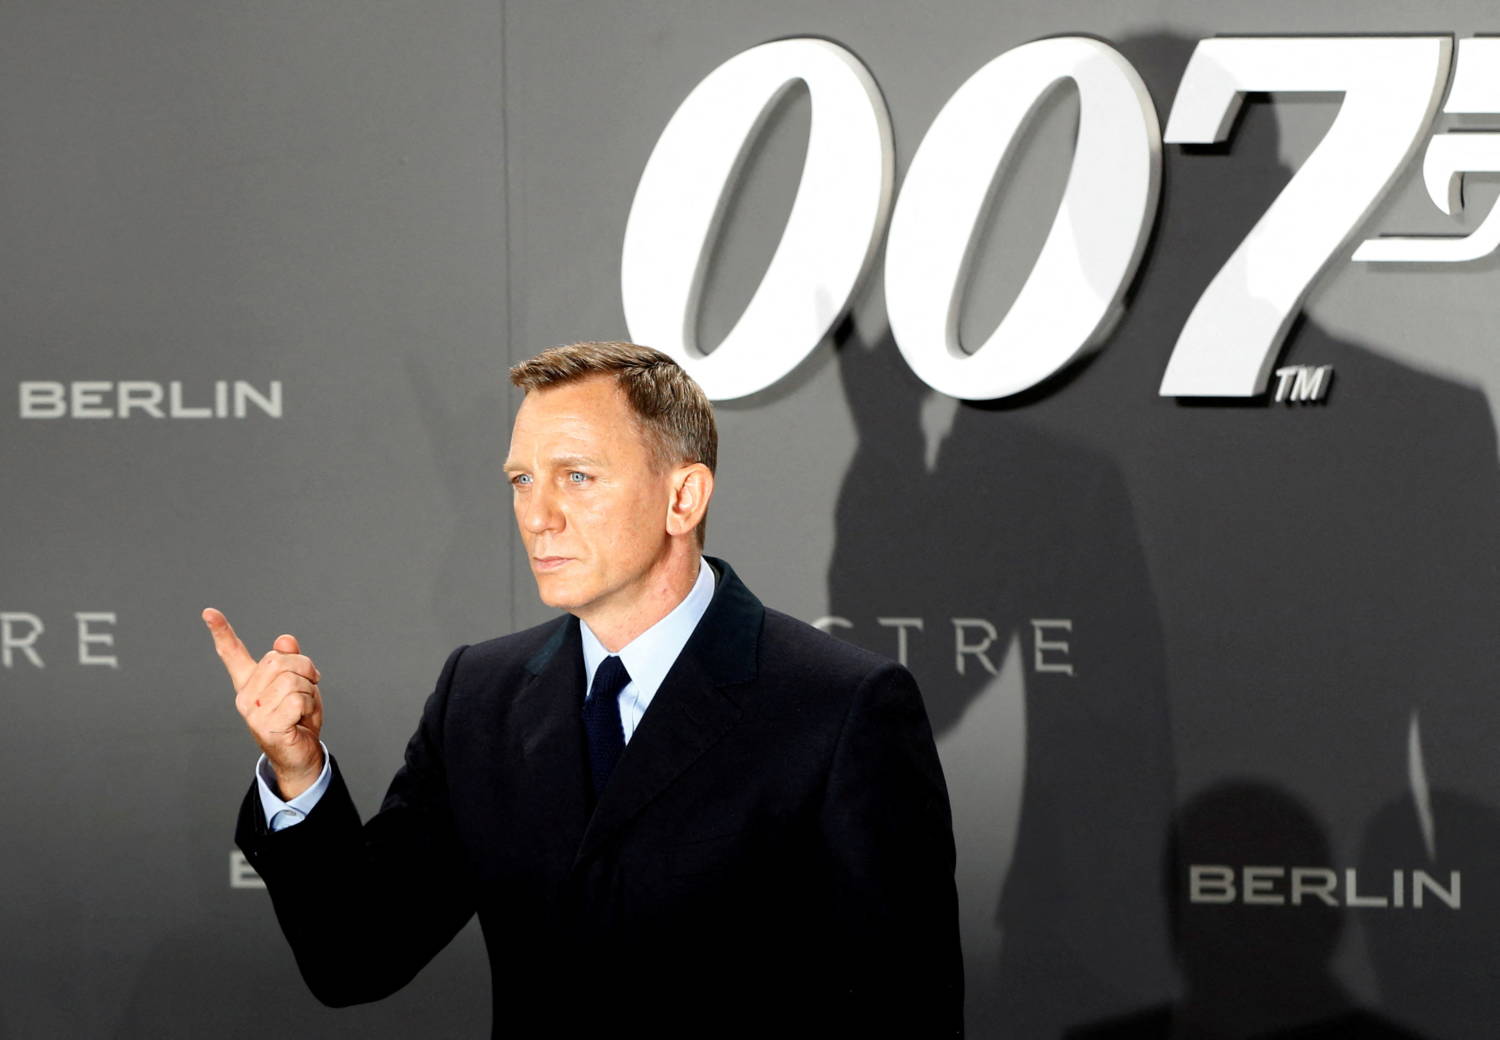 File Photo: Actor Daniel Craig Poses On The Red Carpet At The German Premiere Of The James Bond 007 Film 